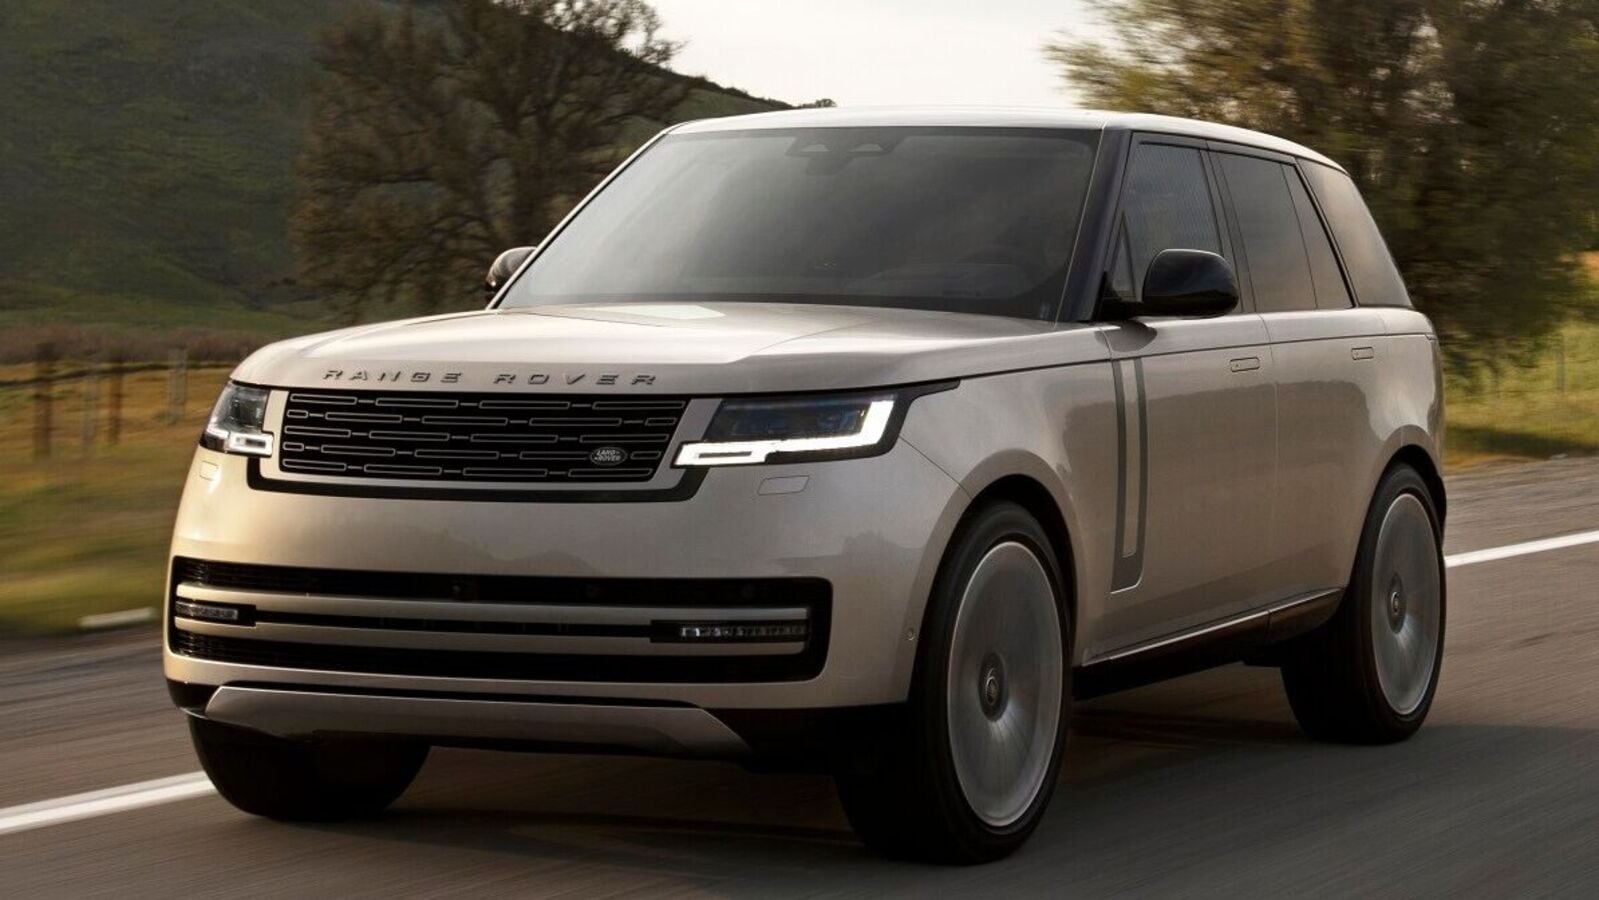 Deliveries for all-new Range Rover luxury SUVcommence. Check price